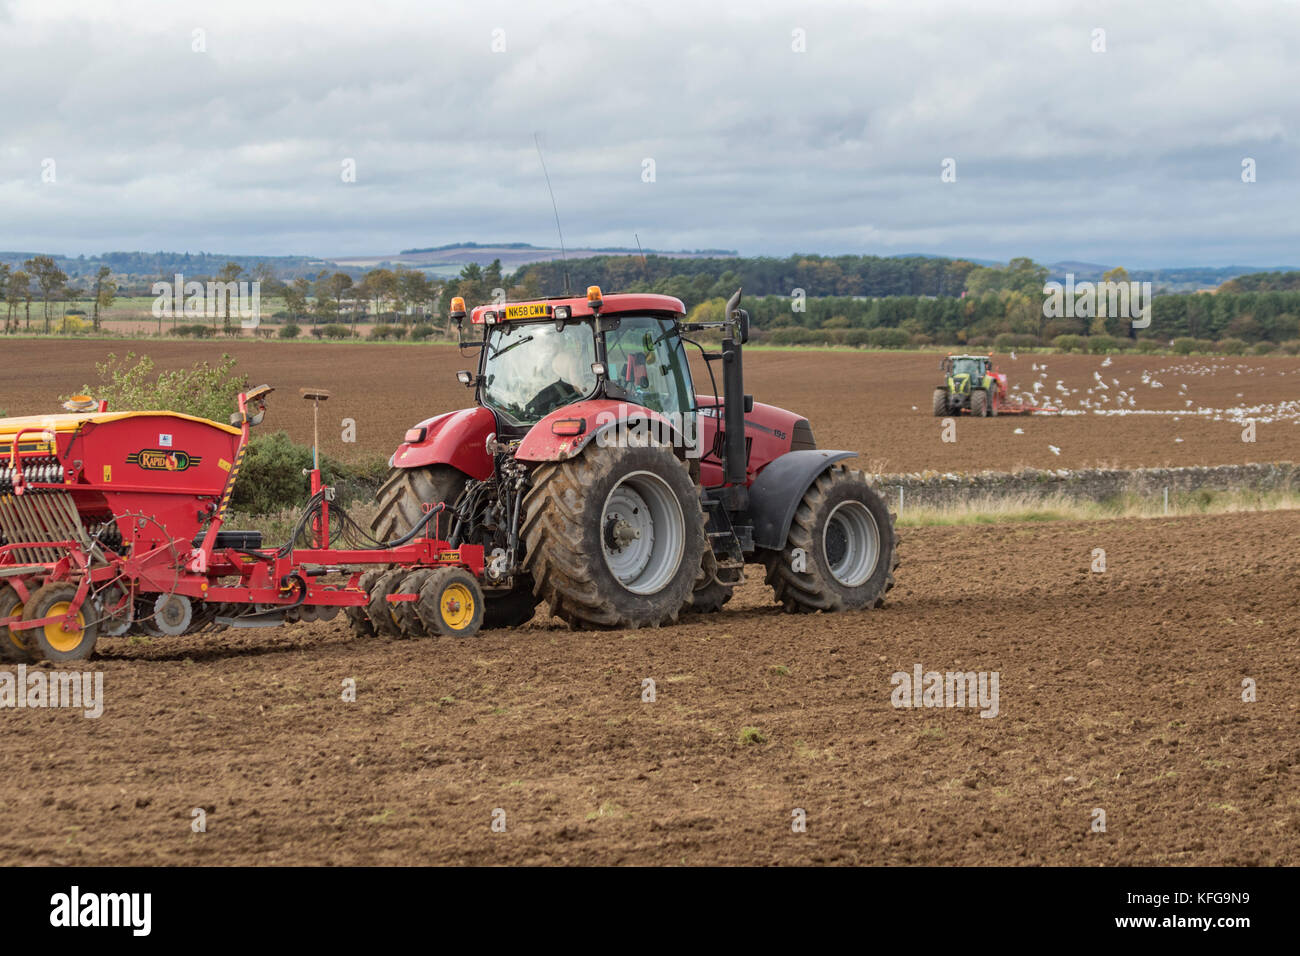 Tilling and seed sowing on a British farm, Britail, UK Stock Photo